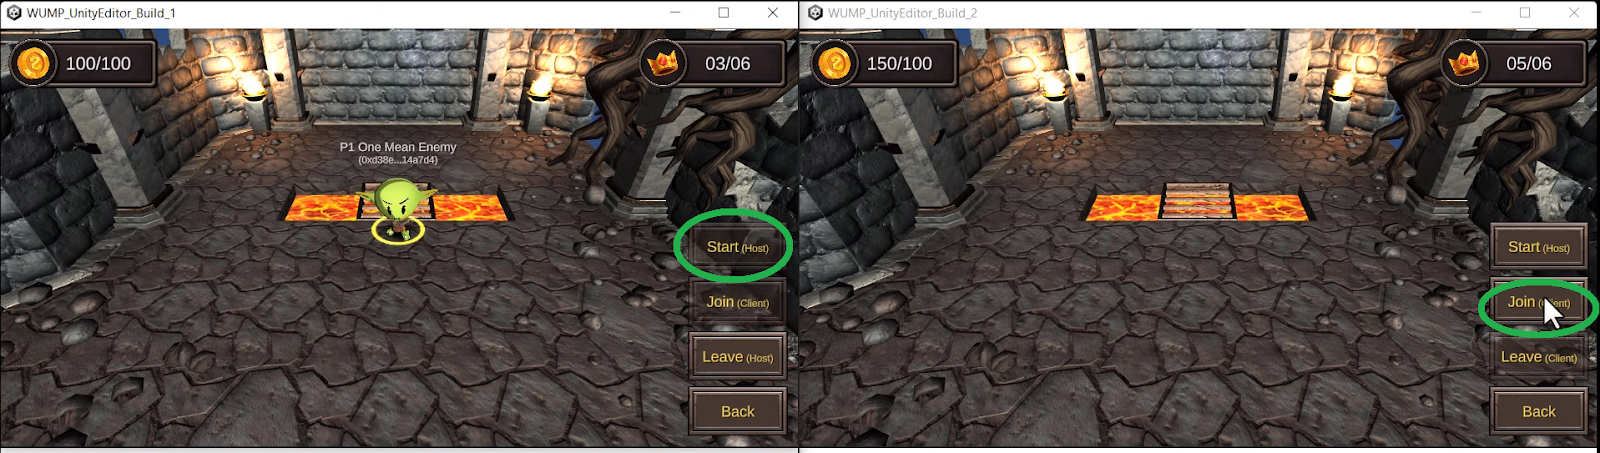 One player inside the game, and we also see another screen where a user clicks on the Join button.